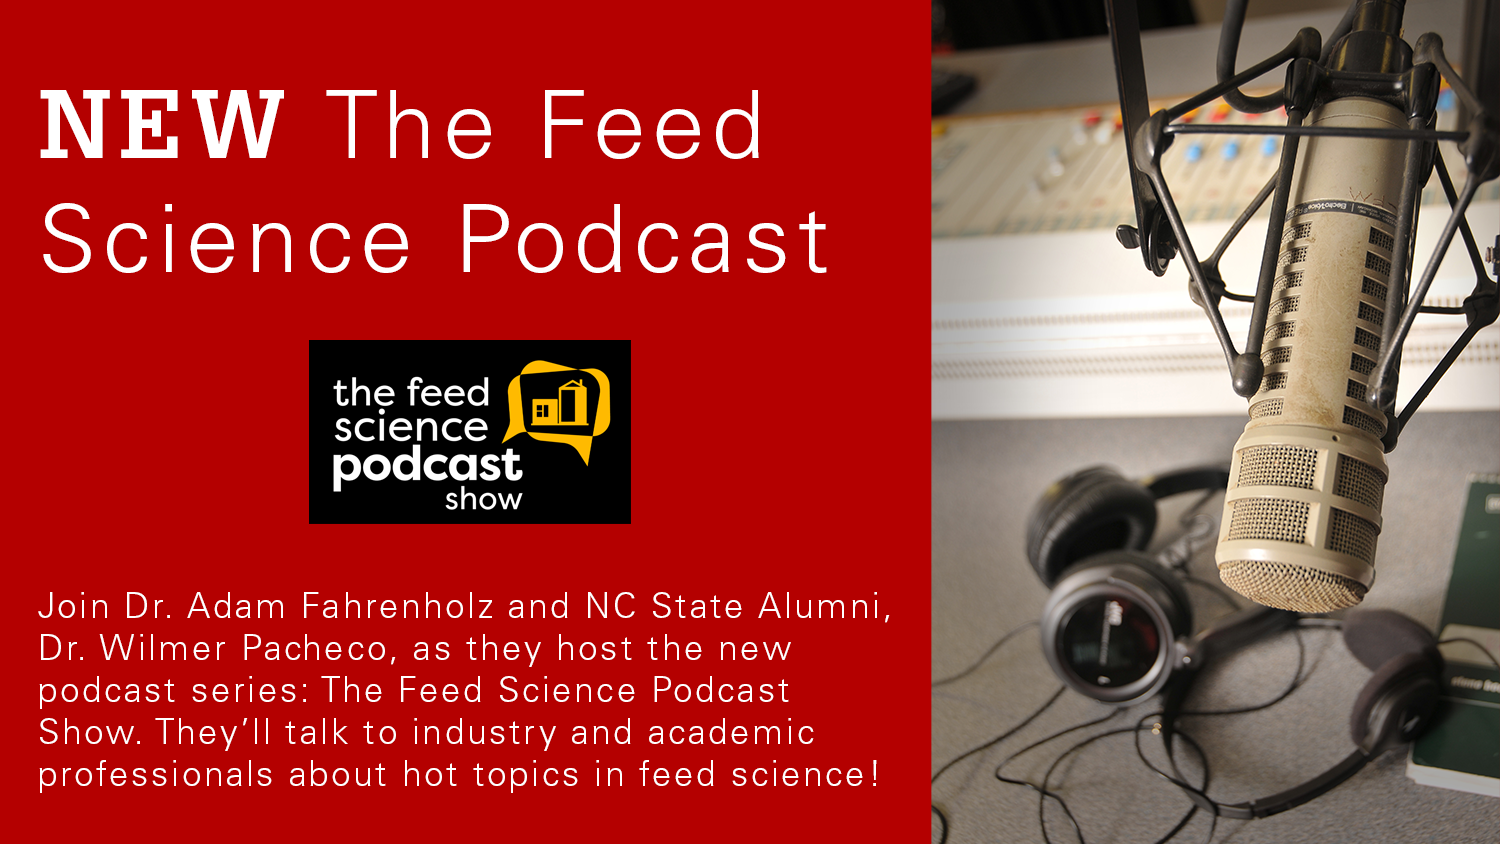 feed science podcast banner image